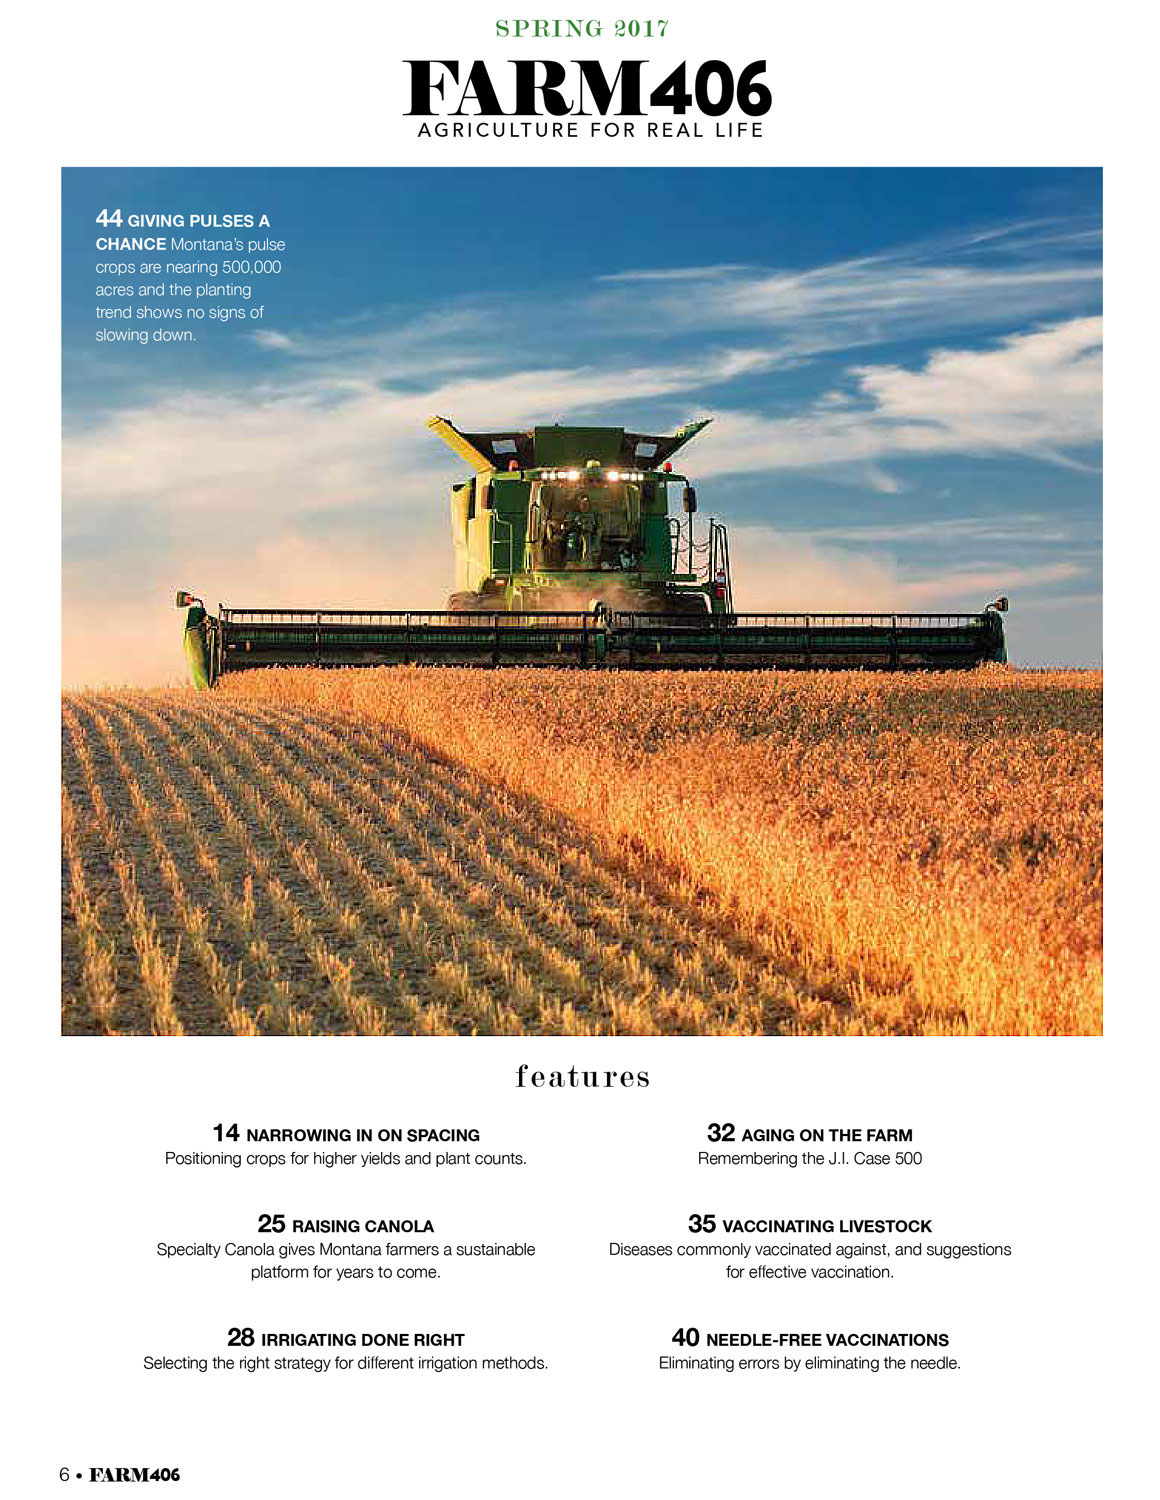 Photo of chickpea harvest featured in agriculture magazine